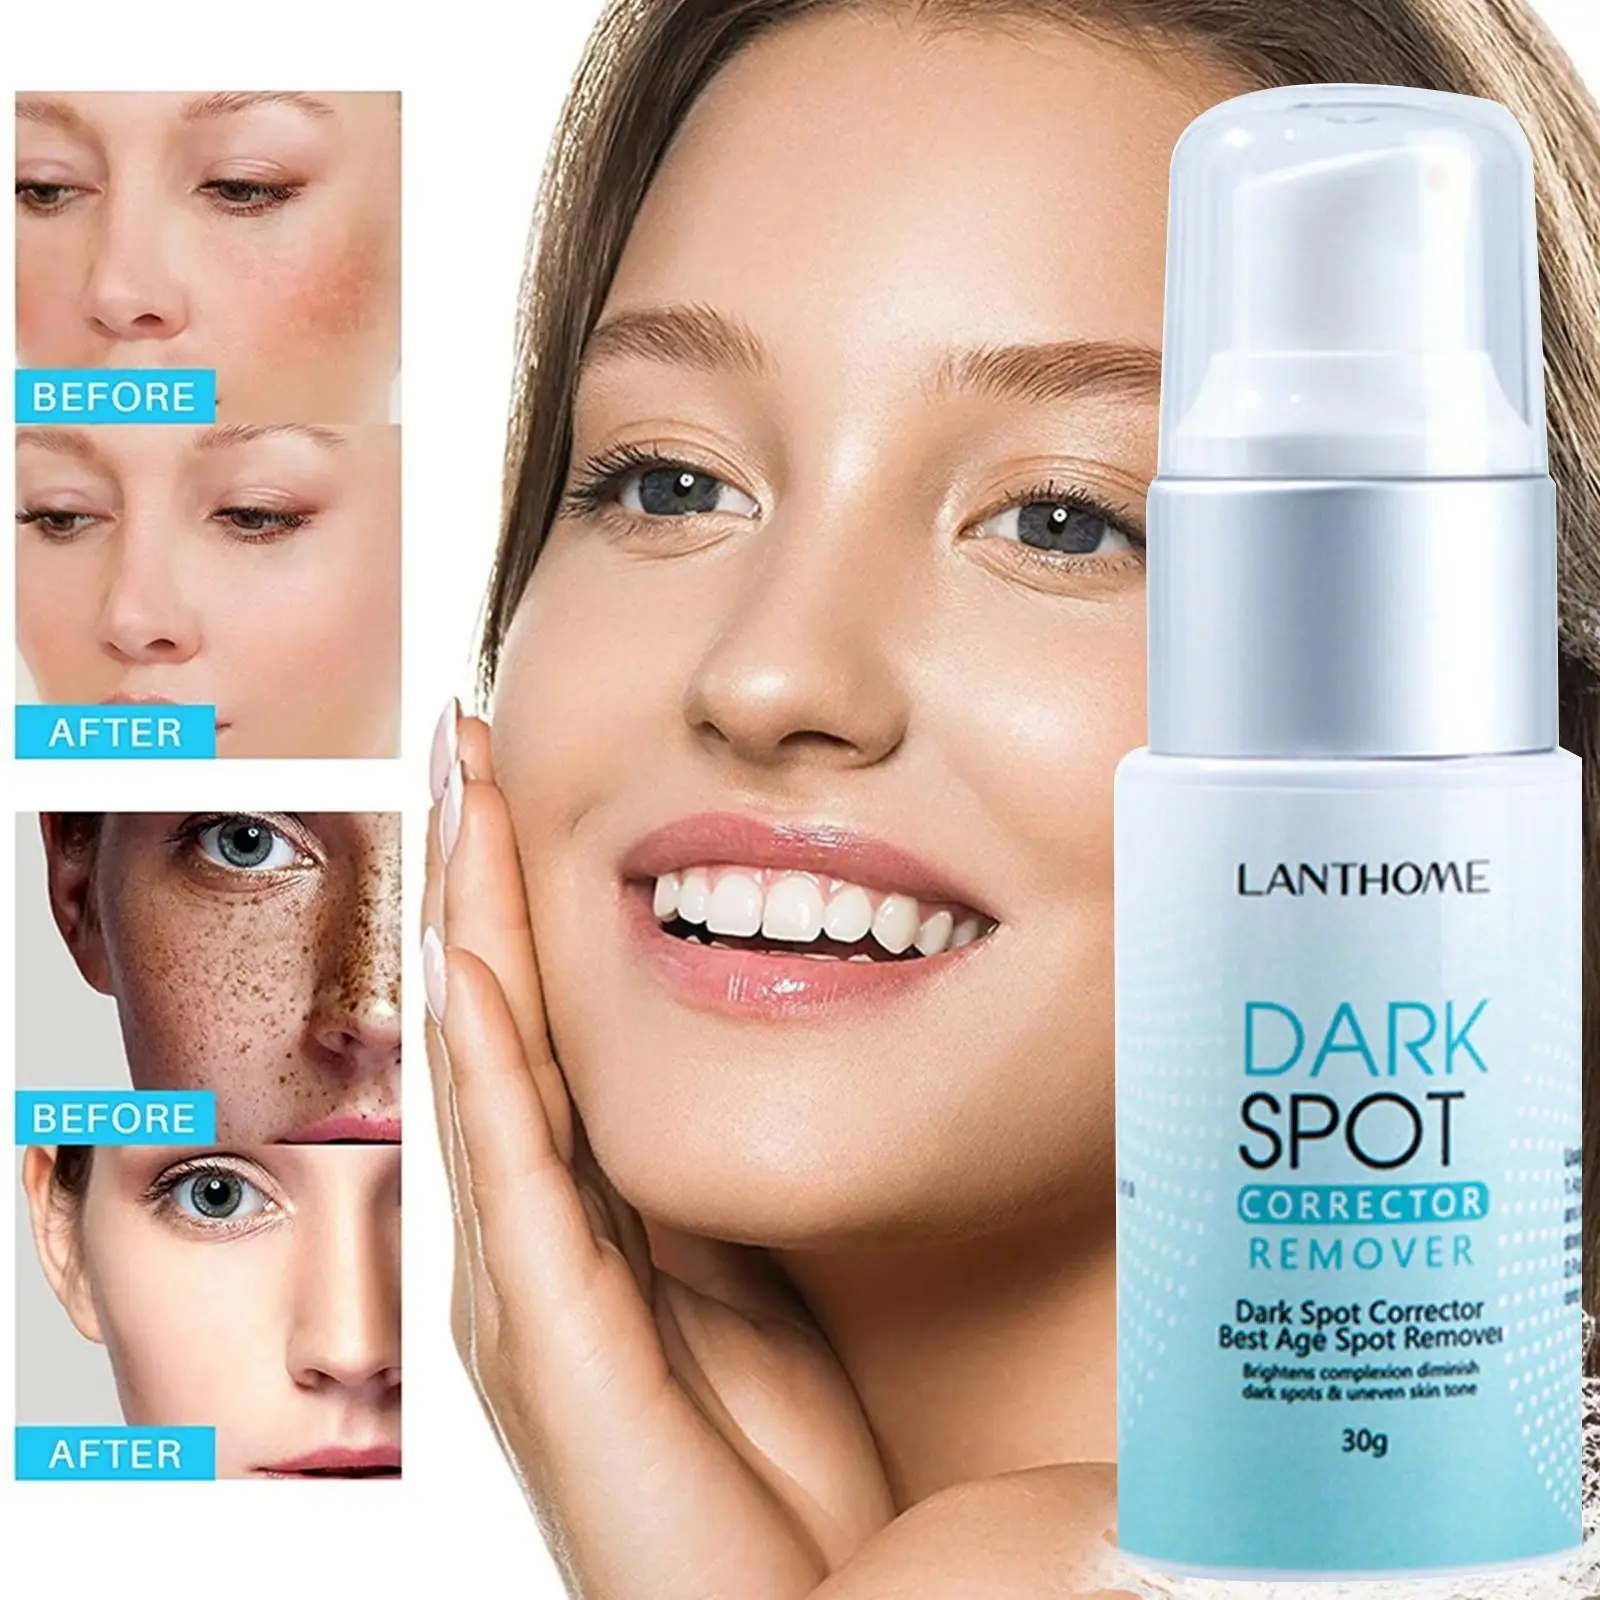 Lanthome Dark Spot Cream Remover Corrector, Whitening Barrier From Skin And And Expelling Toxins Moisturizing, Pores Improv O2B5